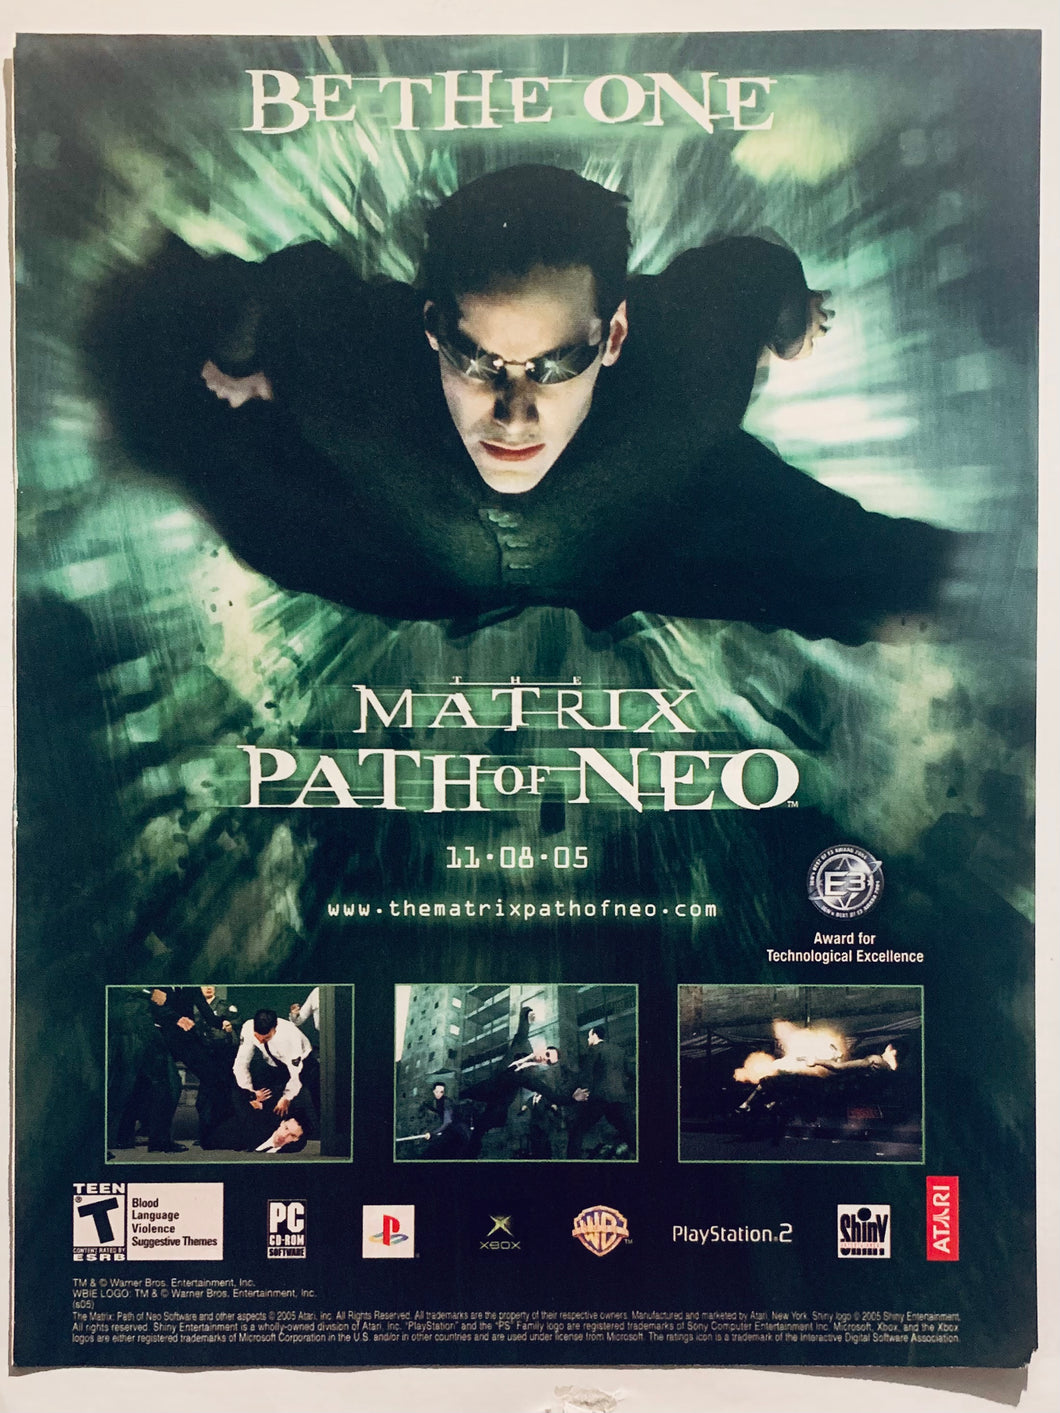 The Matrix: Path of Neo - PS2 Xbox PC - Original Vintage Advertisement - Print Ads - Laminated A4 Poster